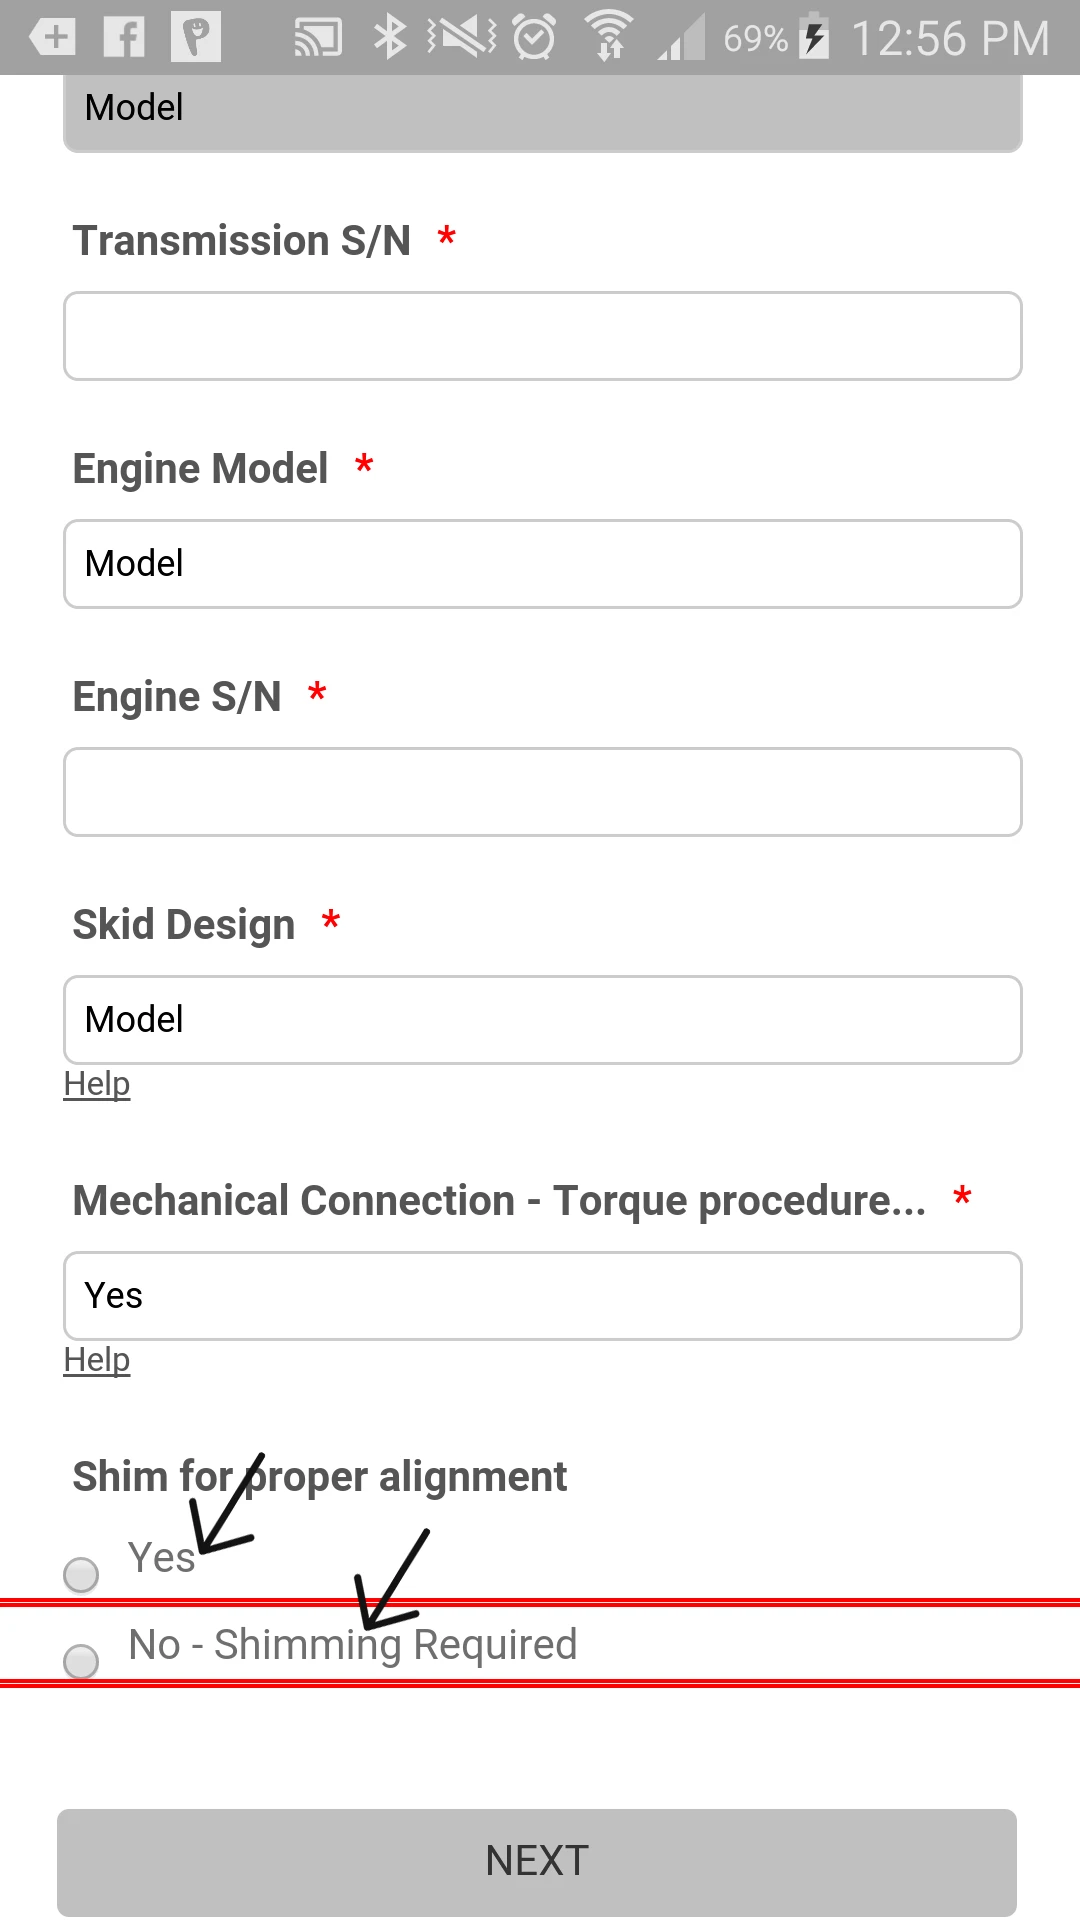 Radio text is not aligned to radio buttons Image 1 Screenshot 20